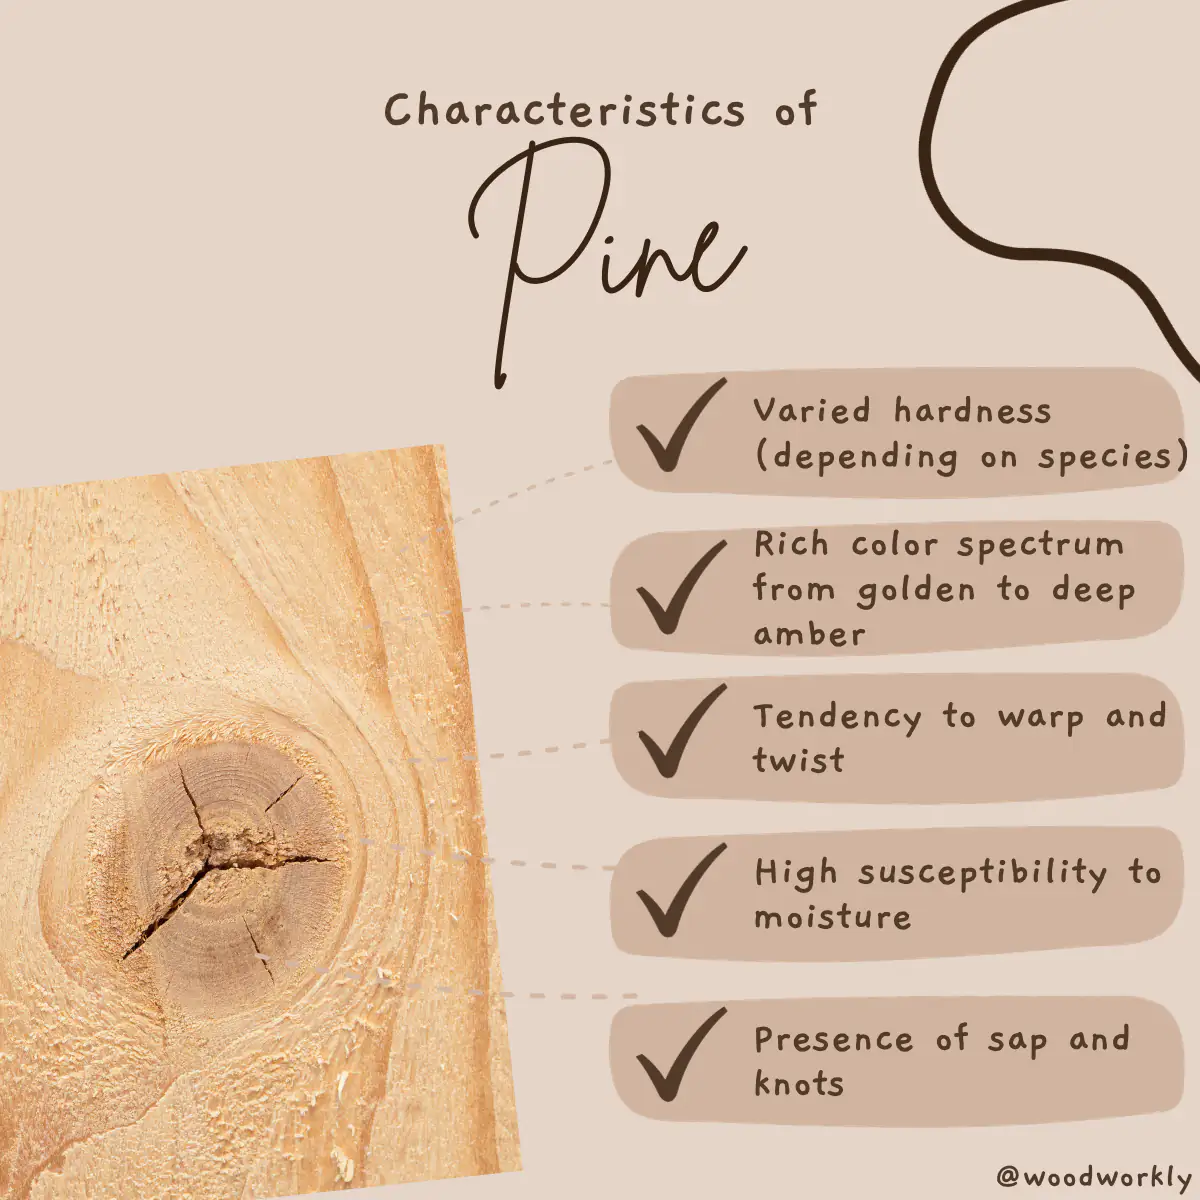 Characteristic features of Pine